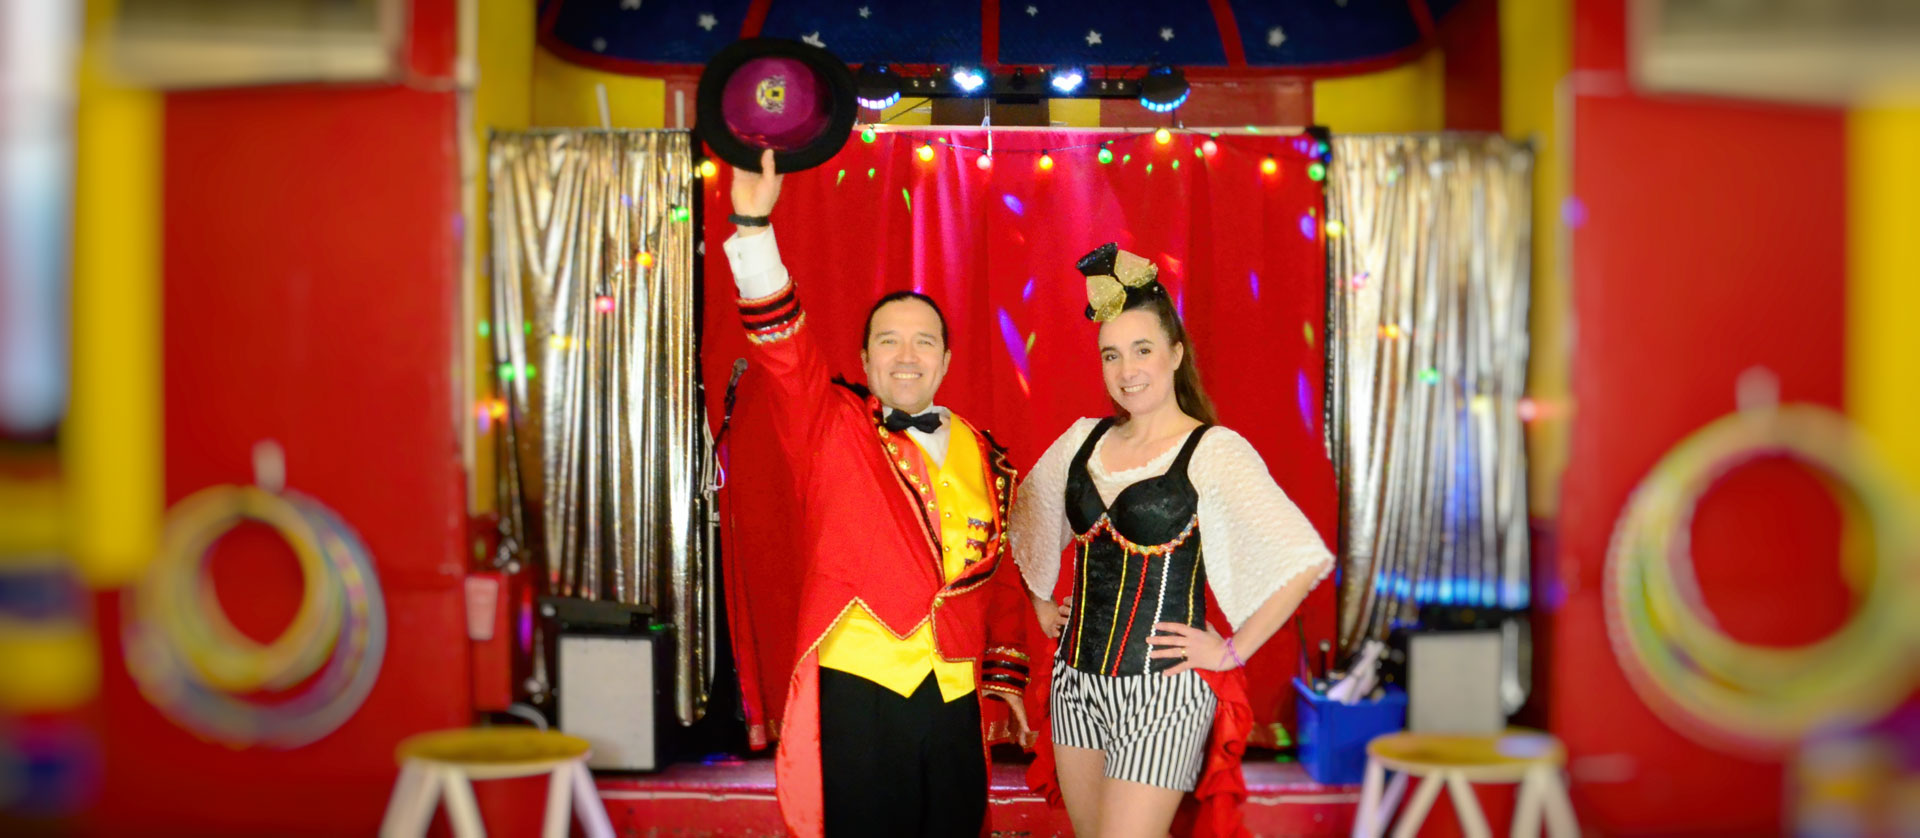 The Greatest Showman inspired kids birthday parties, with Melanie and Angelo. For school trip and team building too at Magical Circus.